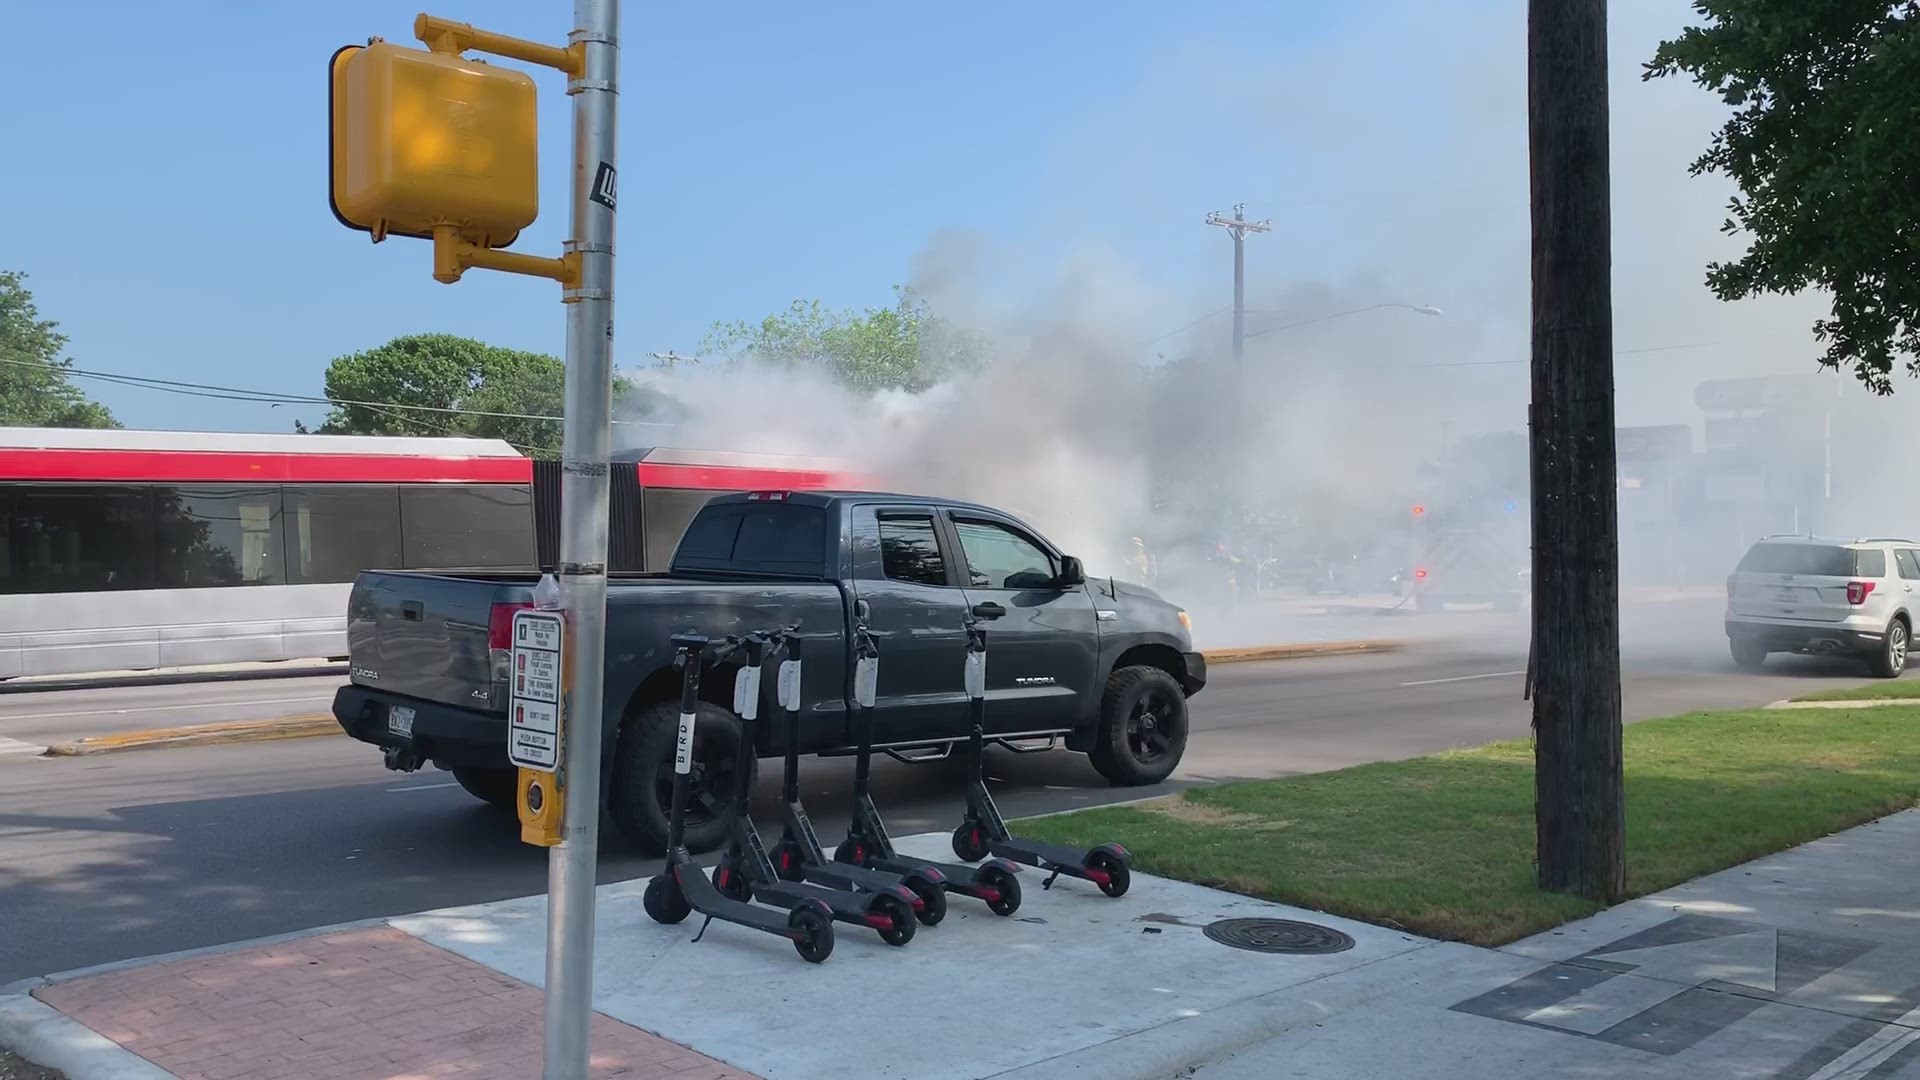 A Capital Metro bus caught fire Tuesday near South Congress Avenue and Oltorf Street, but luckily no injuries were reported and the Austin Fire Department was able to extinguish it without a problem. Video courtesy of Atticus Macias.